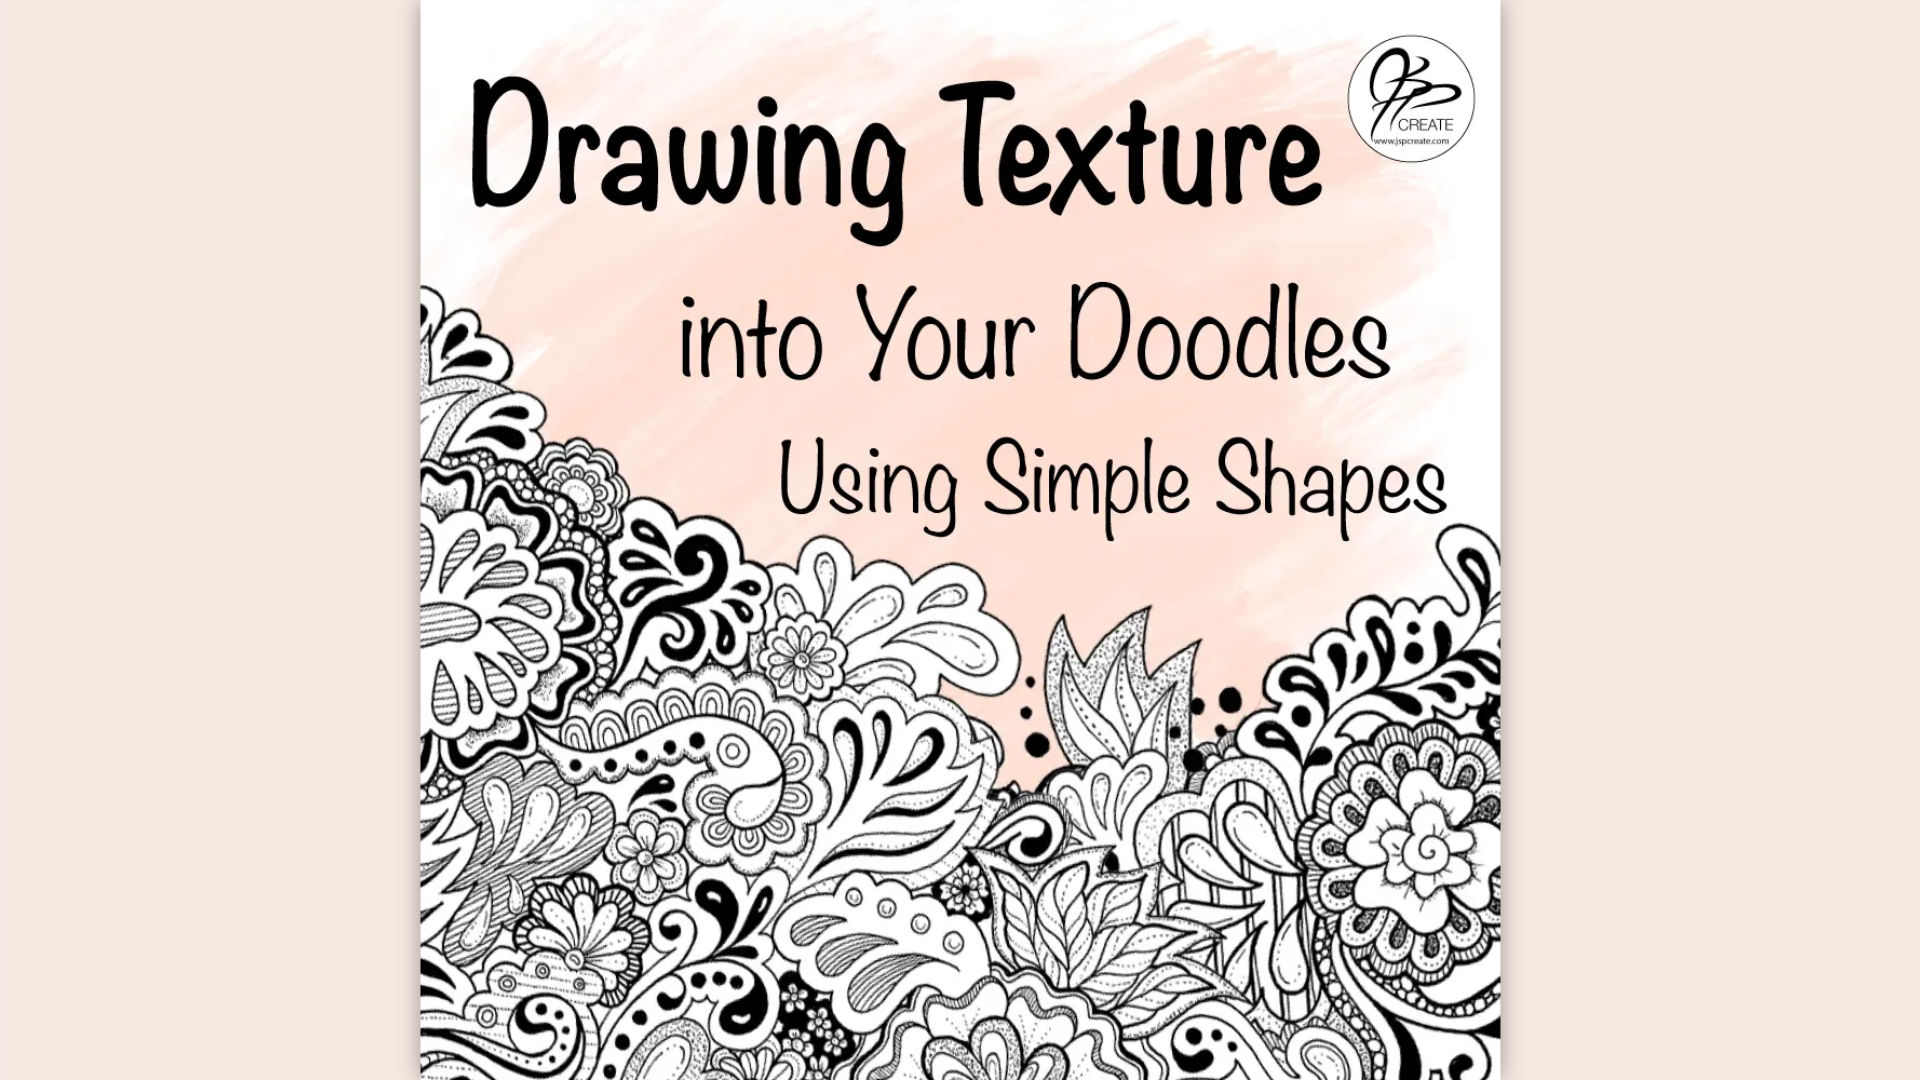 Discover 124+ patterns to draw